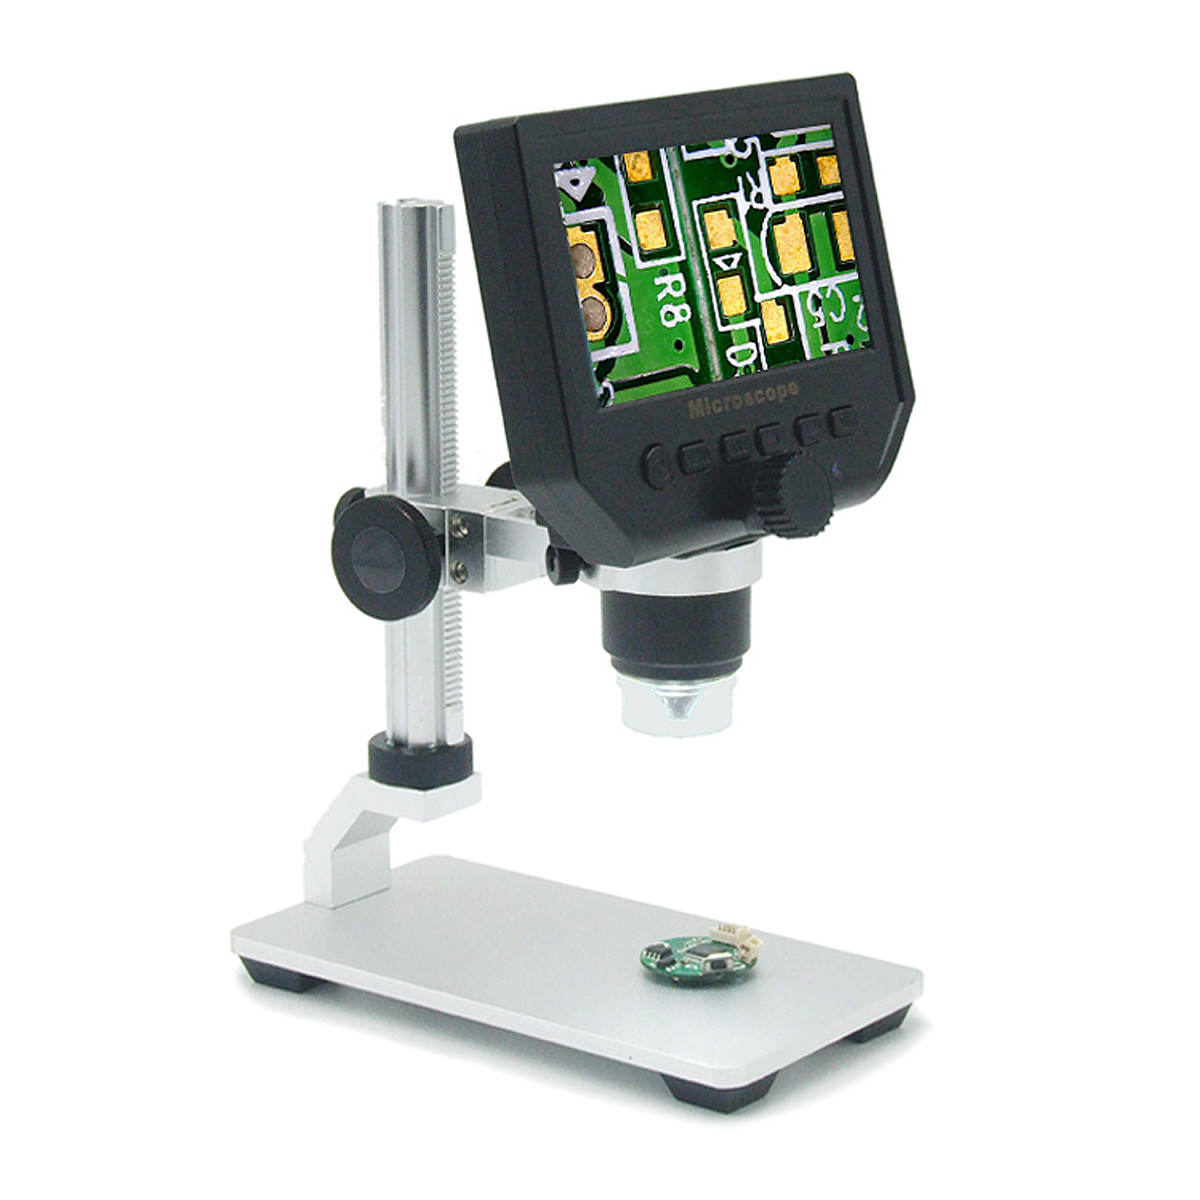 G600-Digital-1-600X-36MP-43inch-HD-LCD-Display-Microscope-Continuous-Magnifier-Upgrade-Version-1152799-5